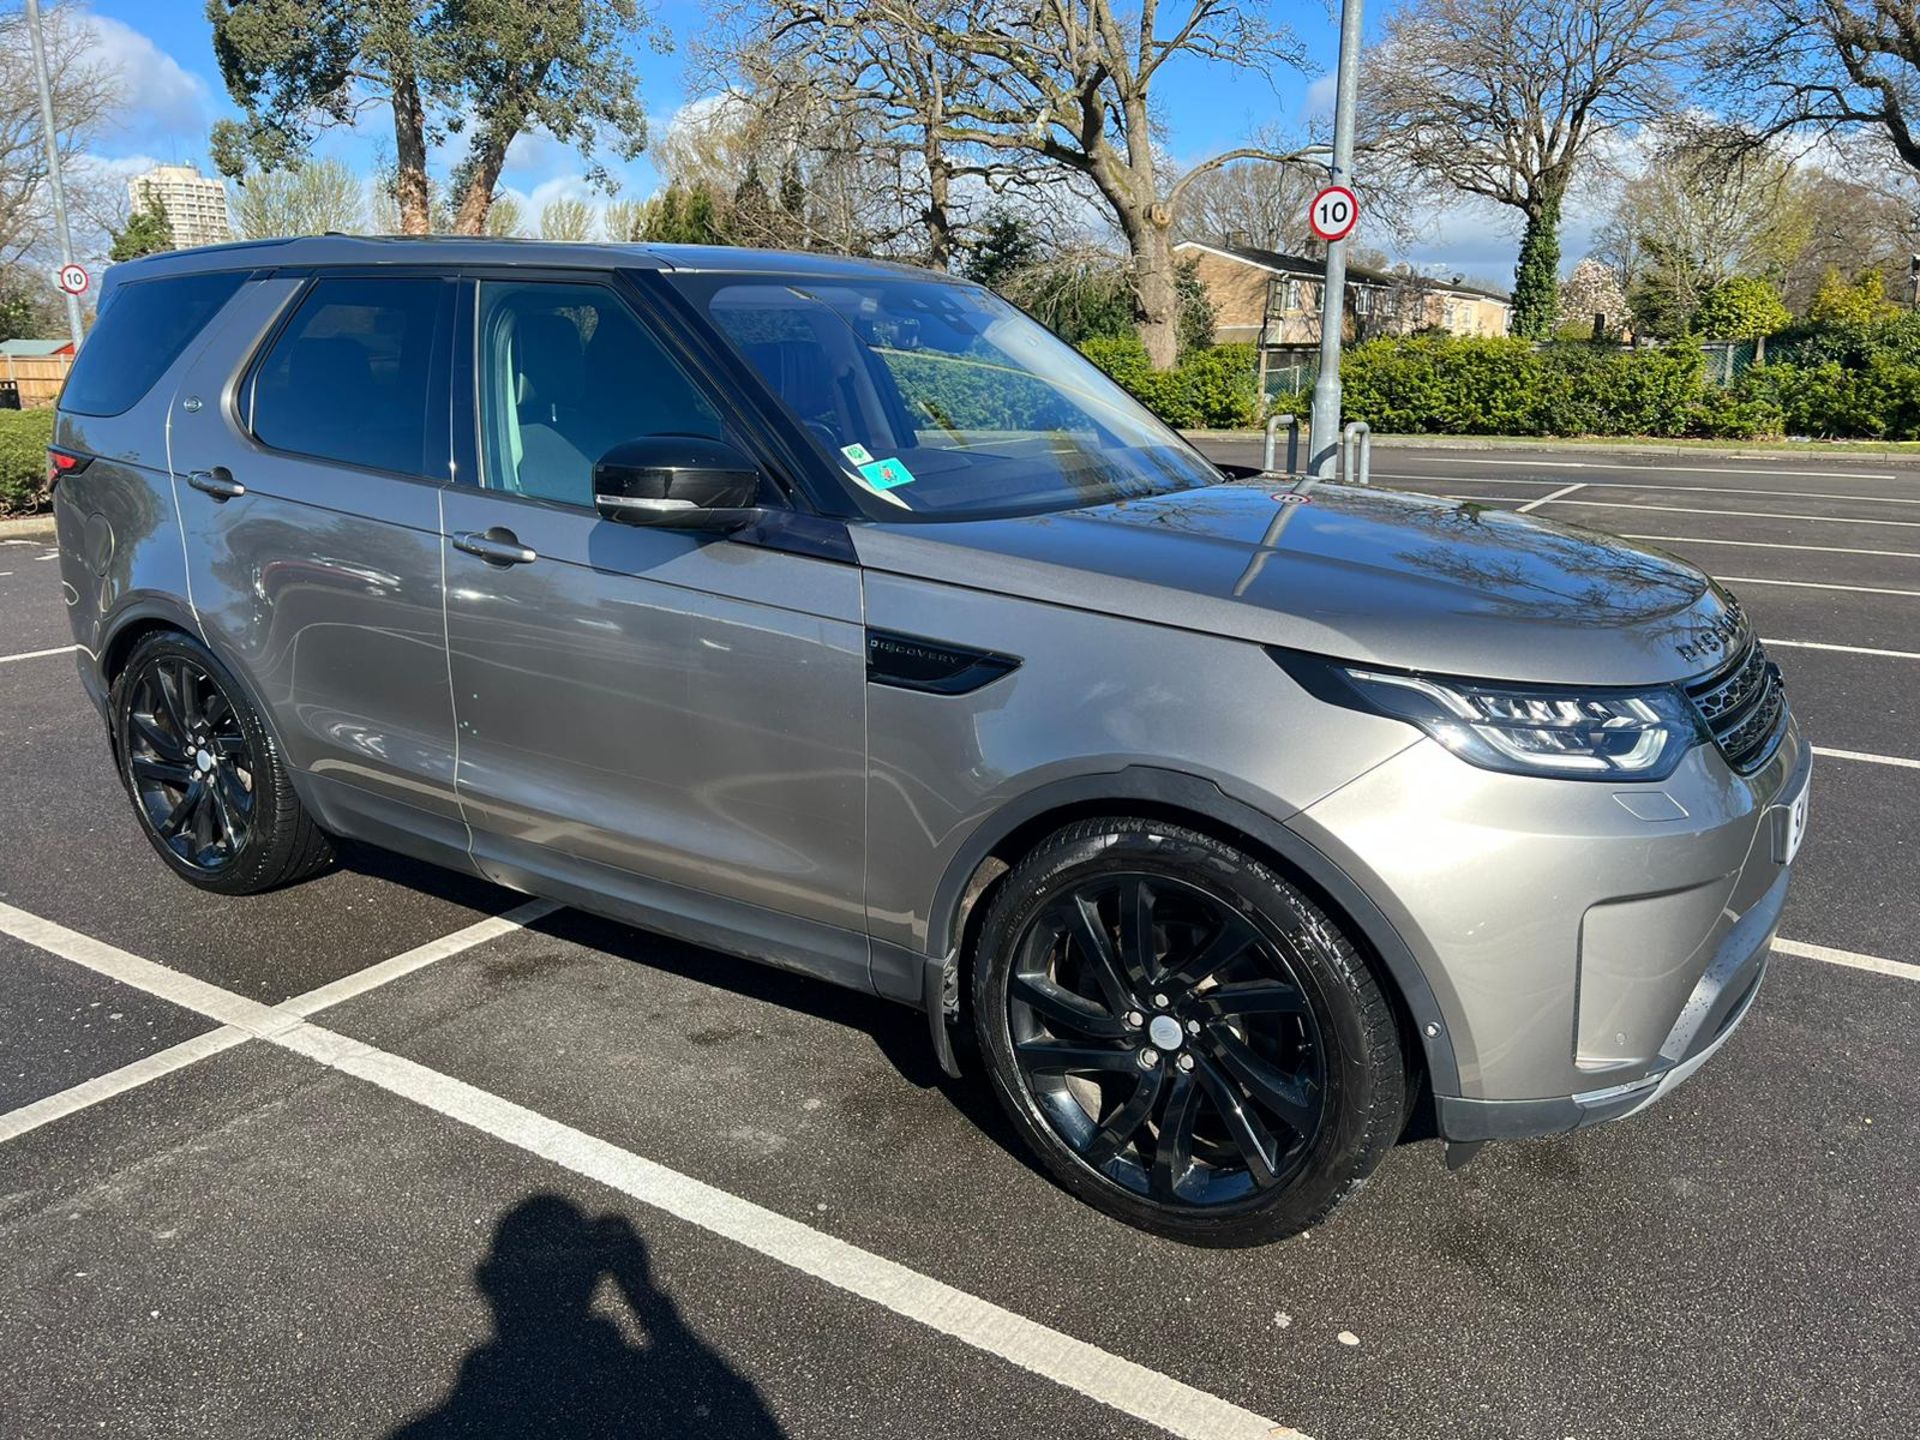 2017 LAND ROVERDISCOVERY FIRST EDITION TD6 AUTO SUV ESTATE, 93K MILES